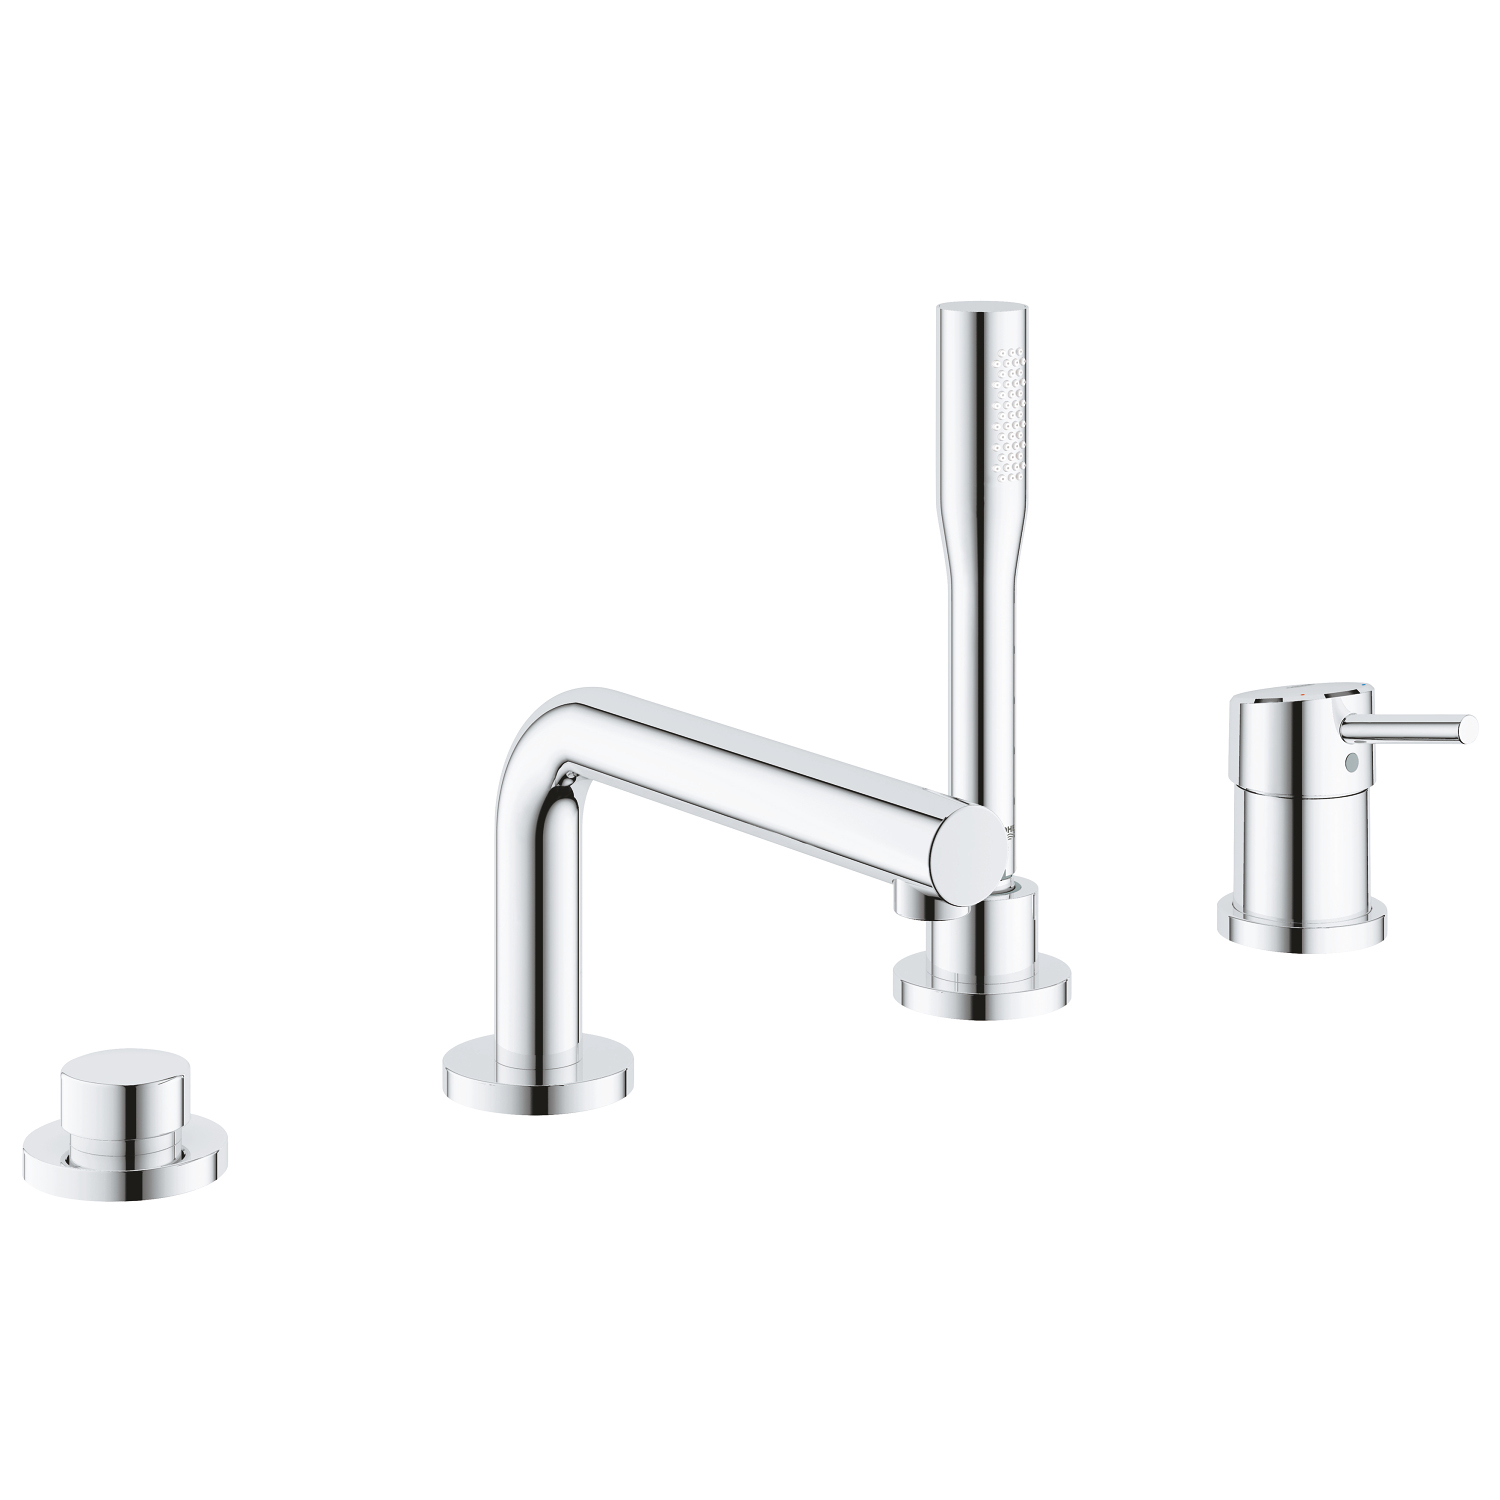 Concetto Deck Mounted Tub Faucet Plus Hand Shower In StarLight Chrome